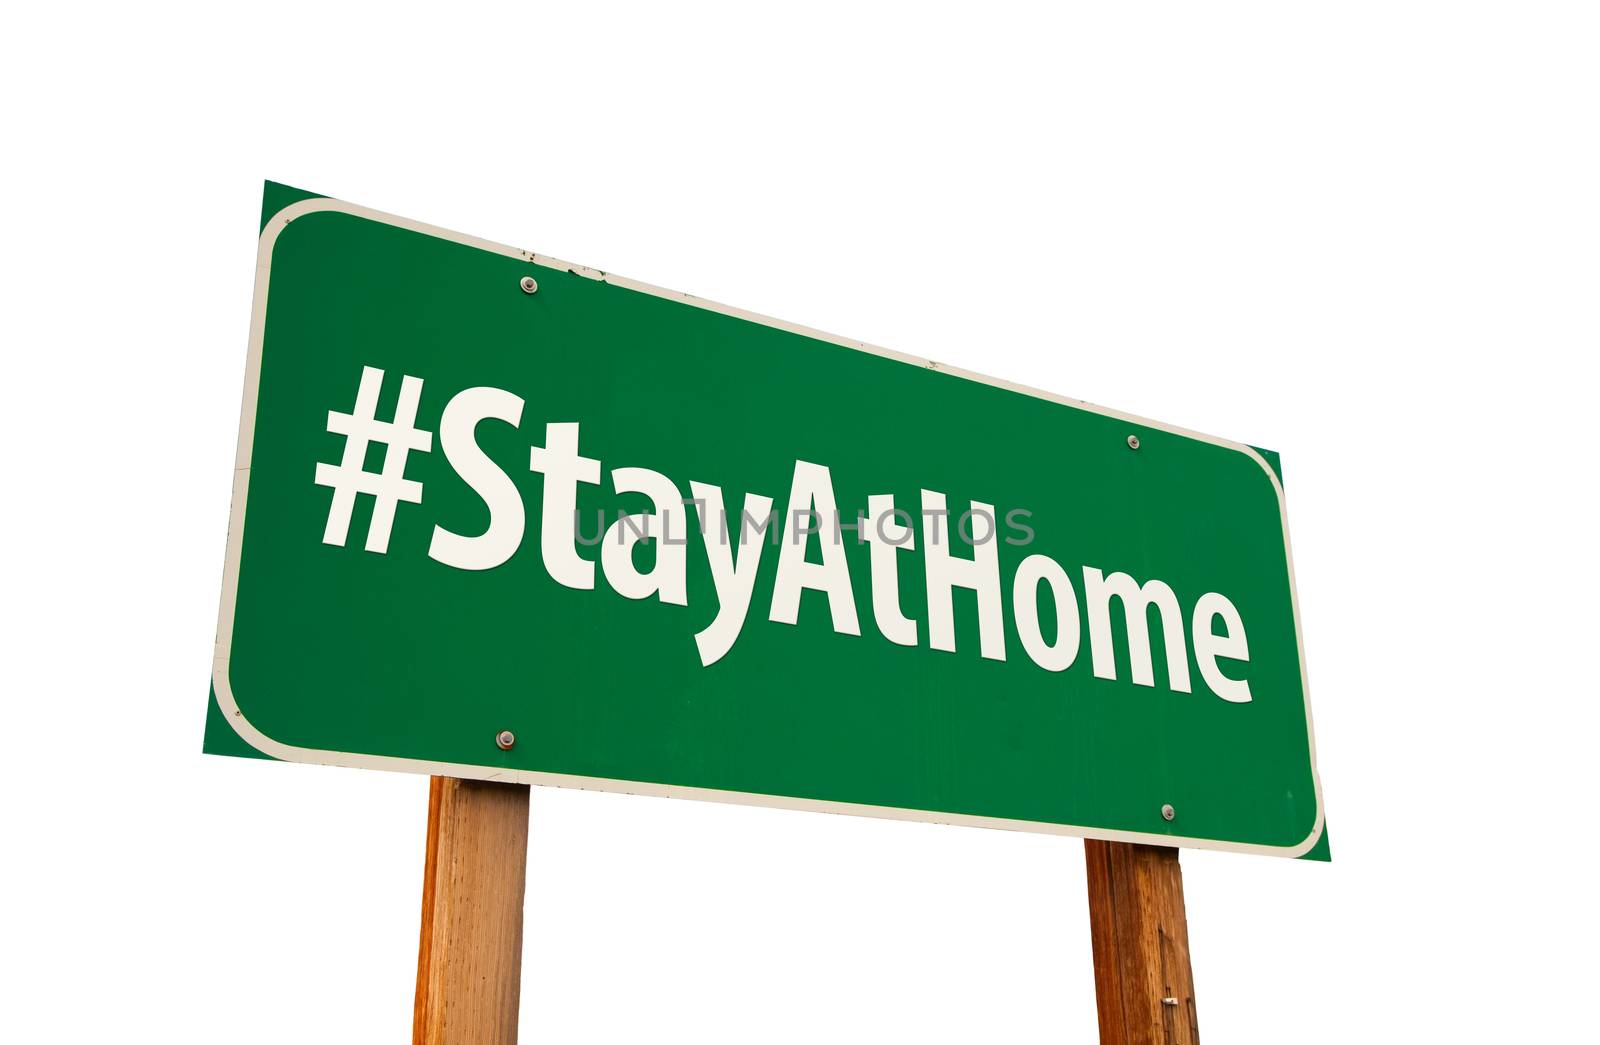 #Stay At Home Green Road Sign Isolated On A White Background by Feverpitched